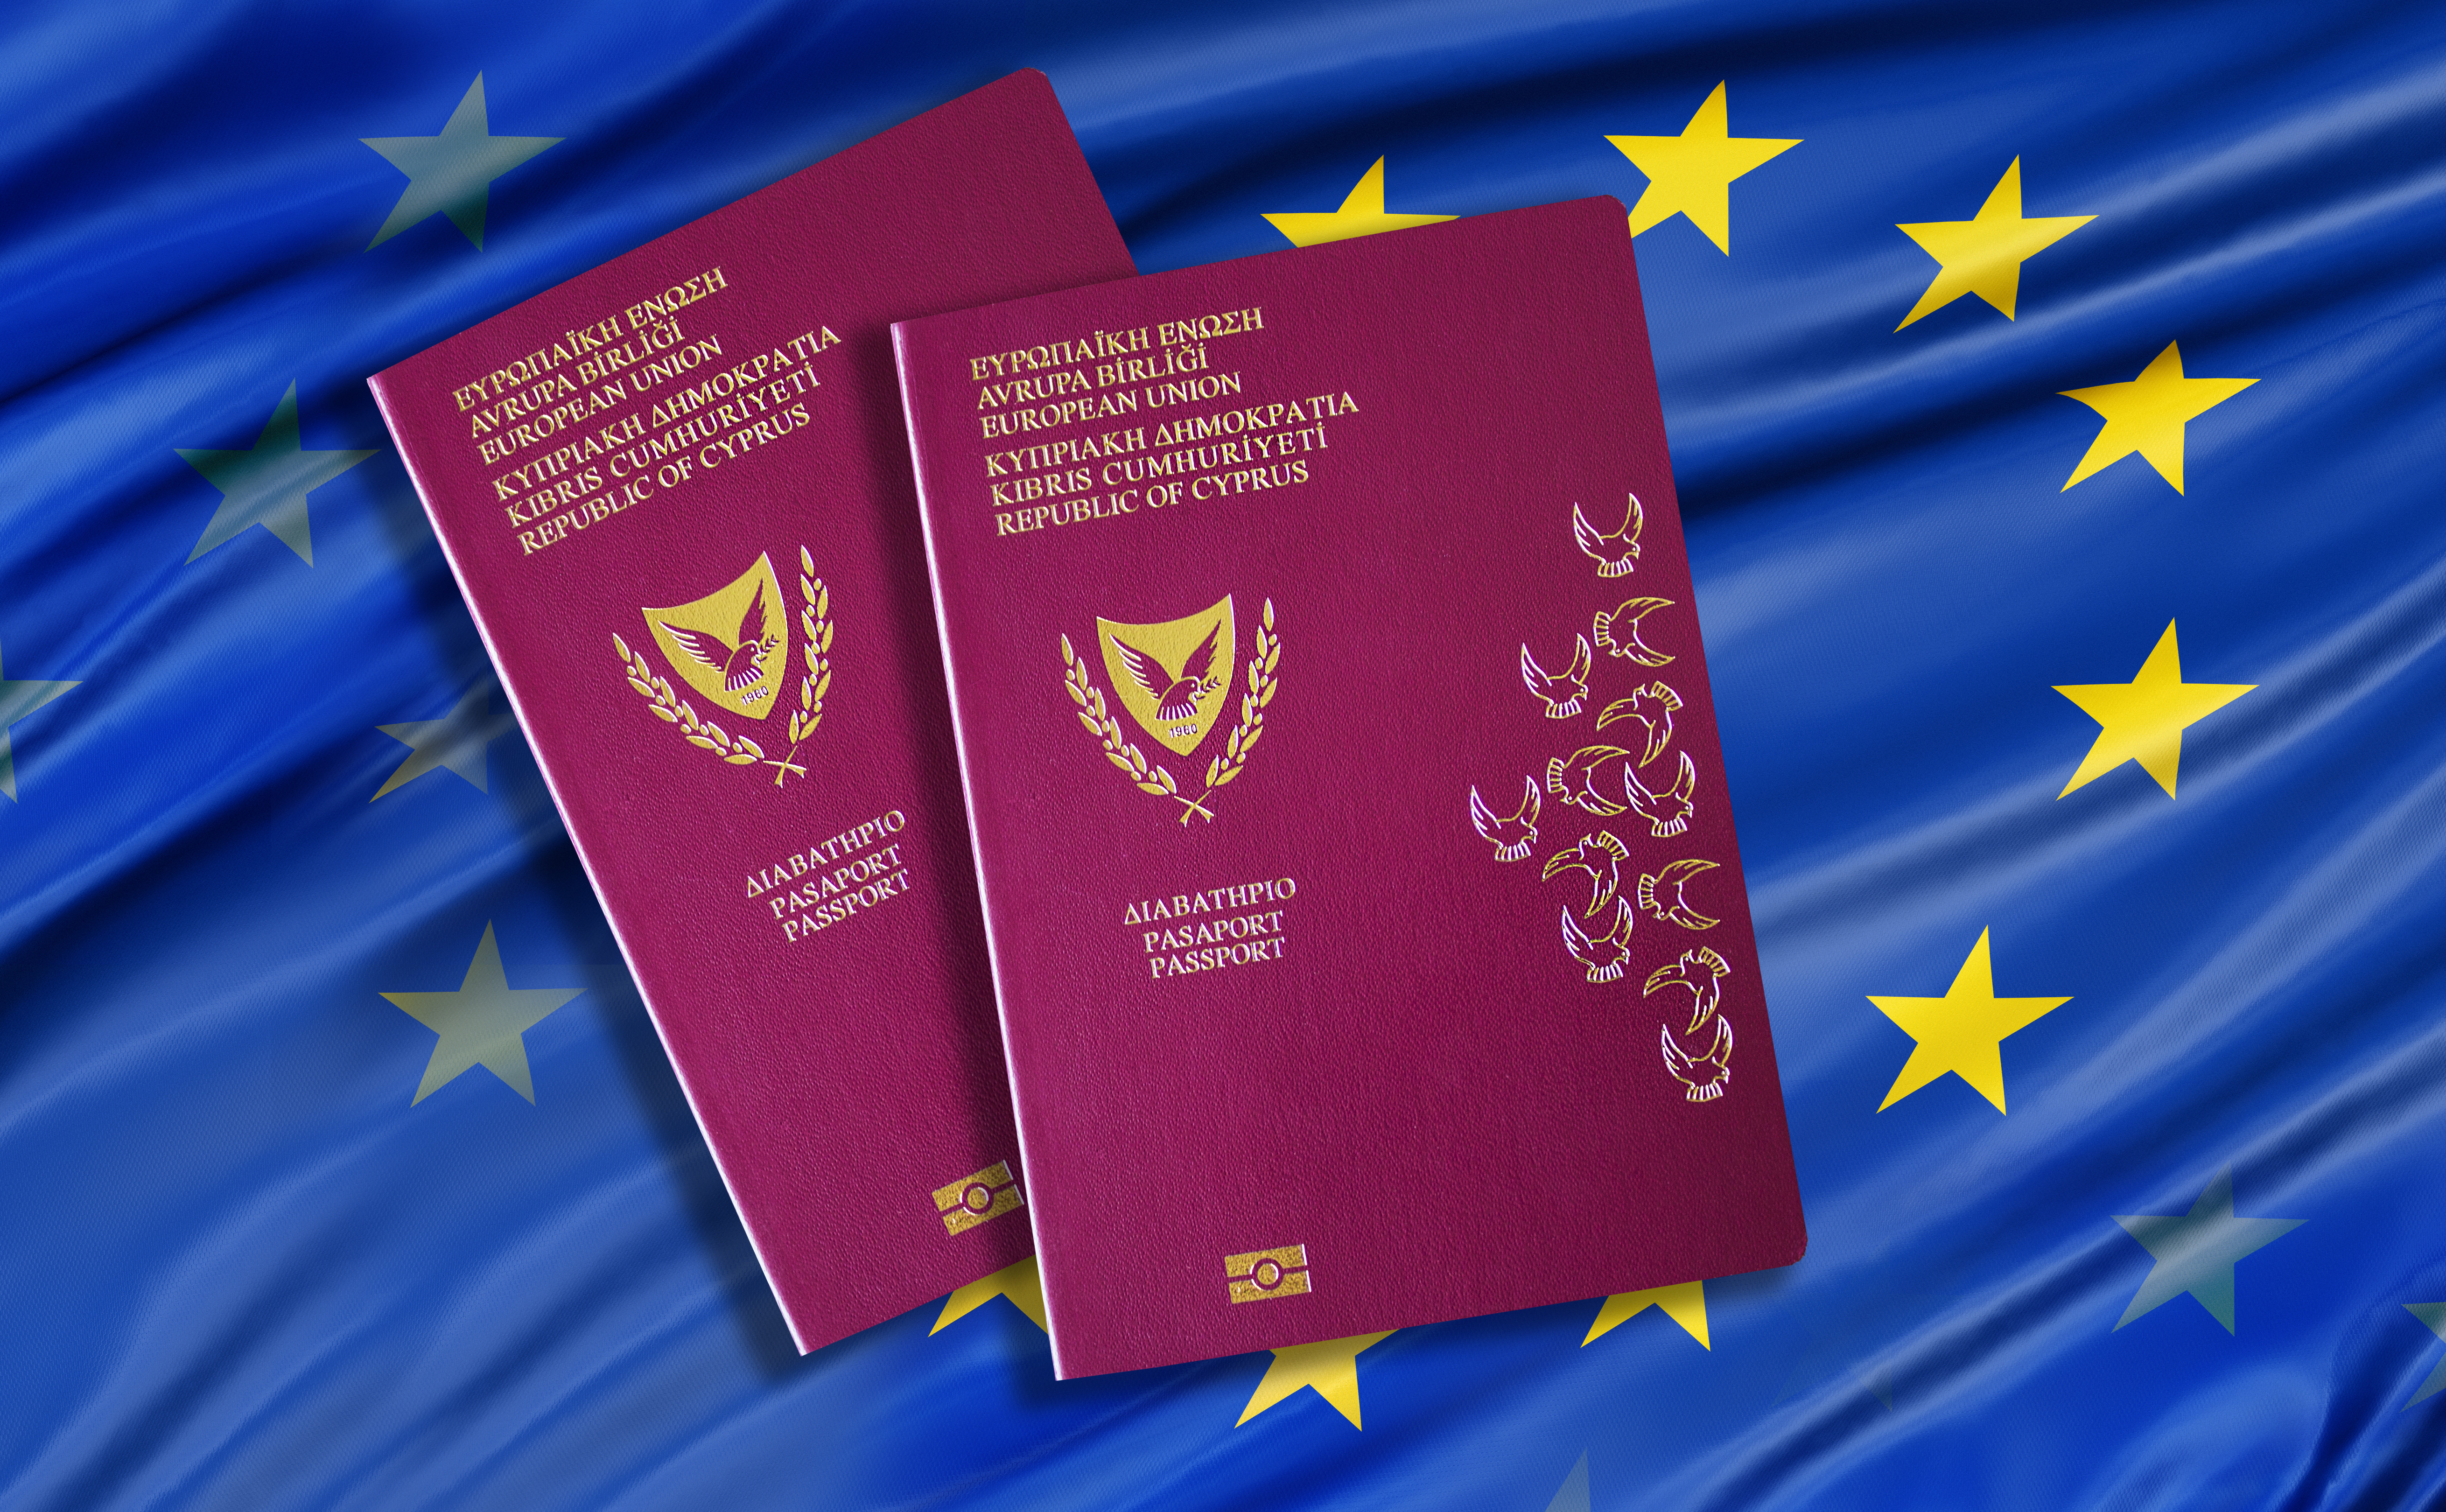 Cyprus last year terminated its citizenship scheme for foreign investors after a corruption scandal. Photo: Shutterstock